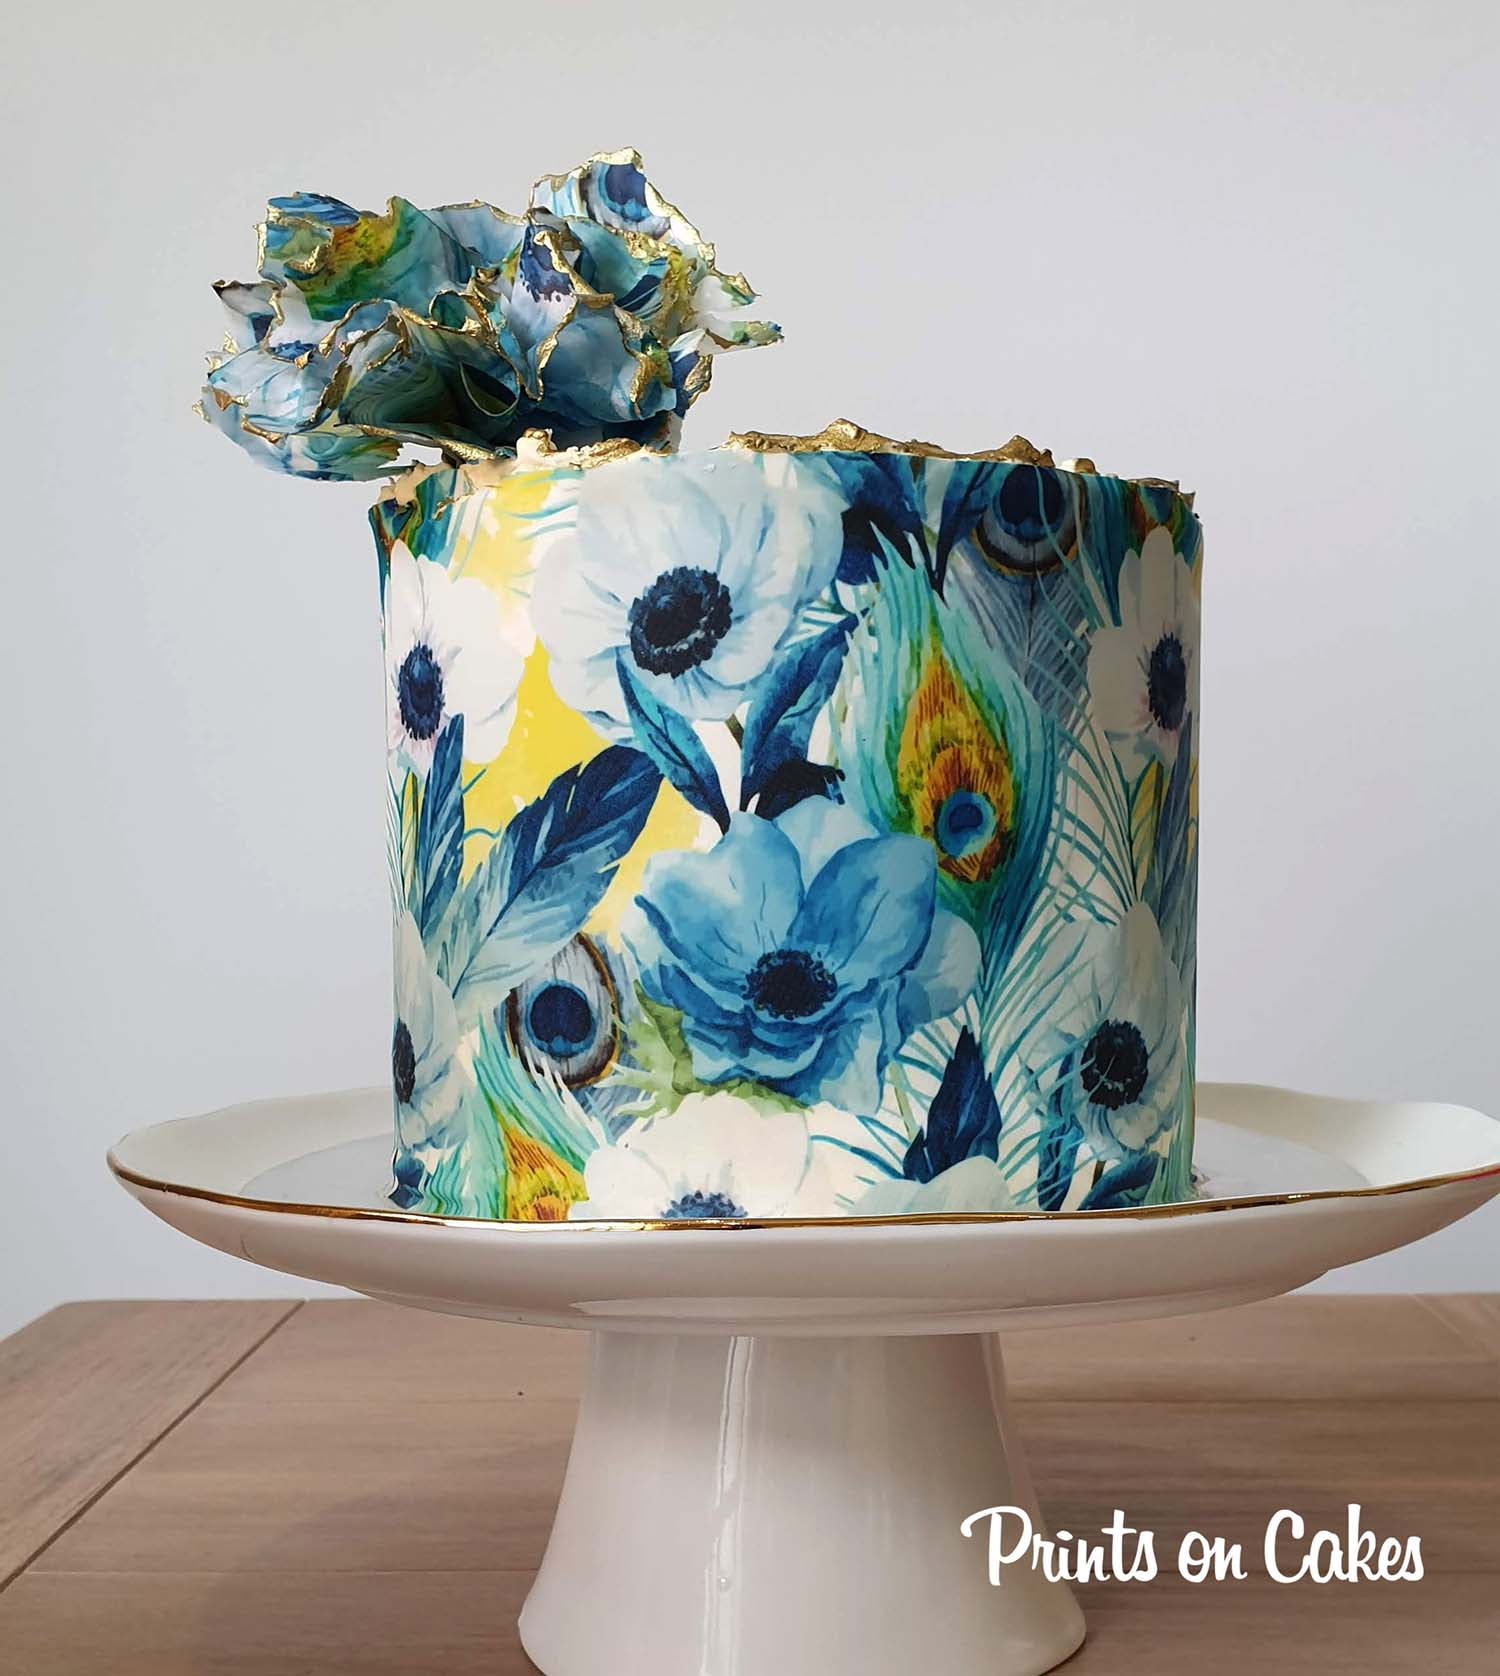 Flowers and Peacock Feathers  - Icing Cake Wrap Edible Cake Topper, Edible Cake Image, ,printsoncakes